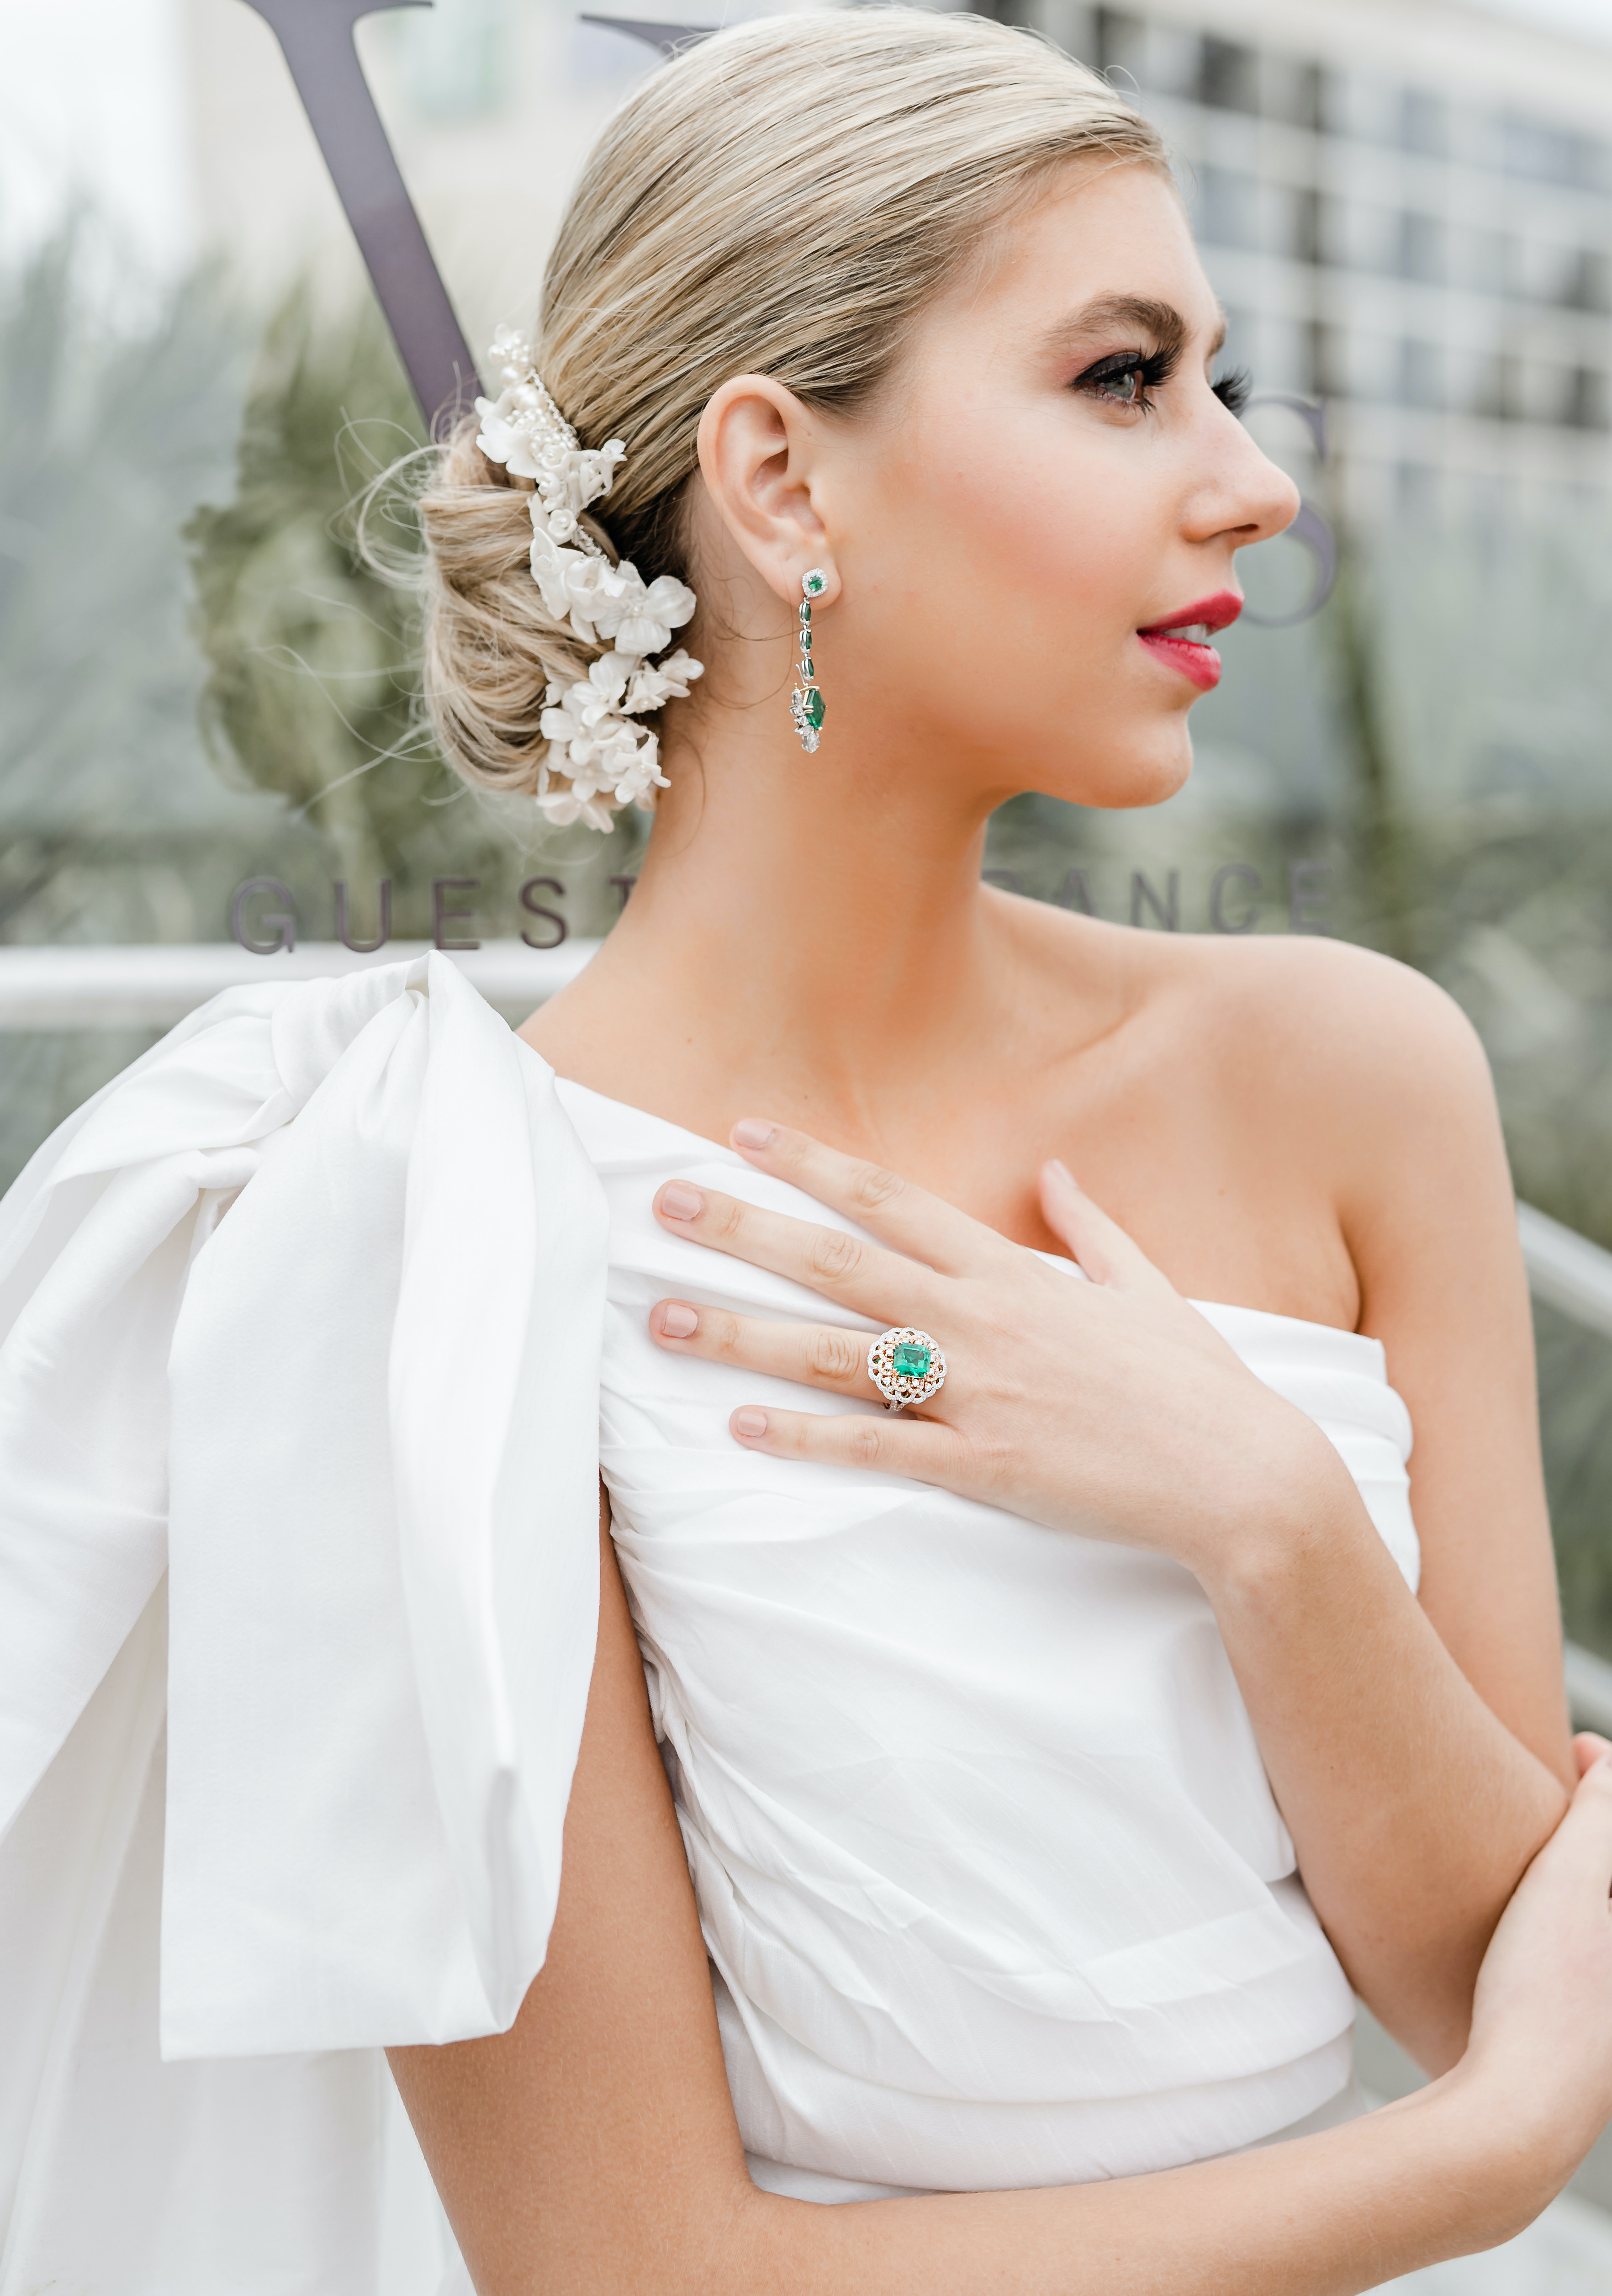 A bride looks away while showing her emerald engagement ring to the camera. Her hair is in a bun with a white flower comb sticking out the side.